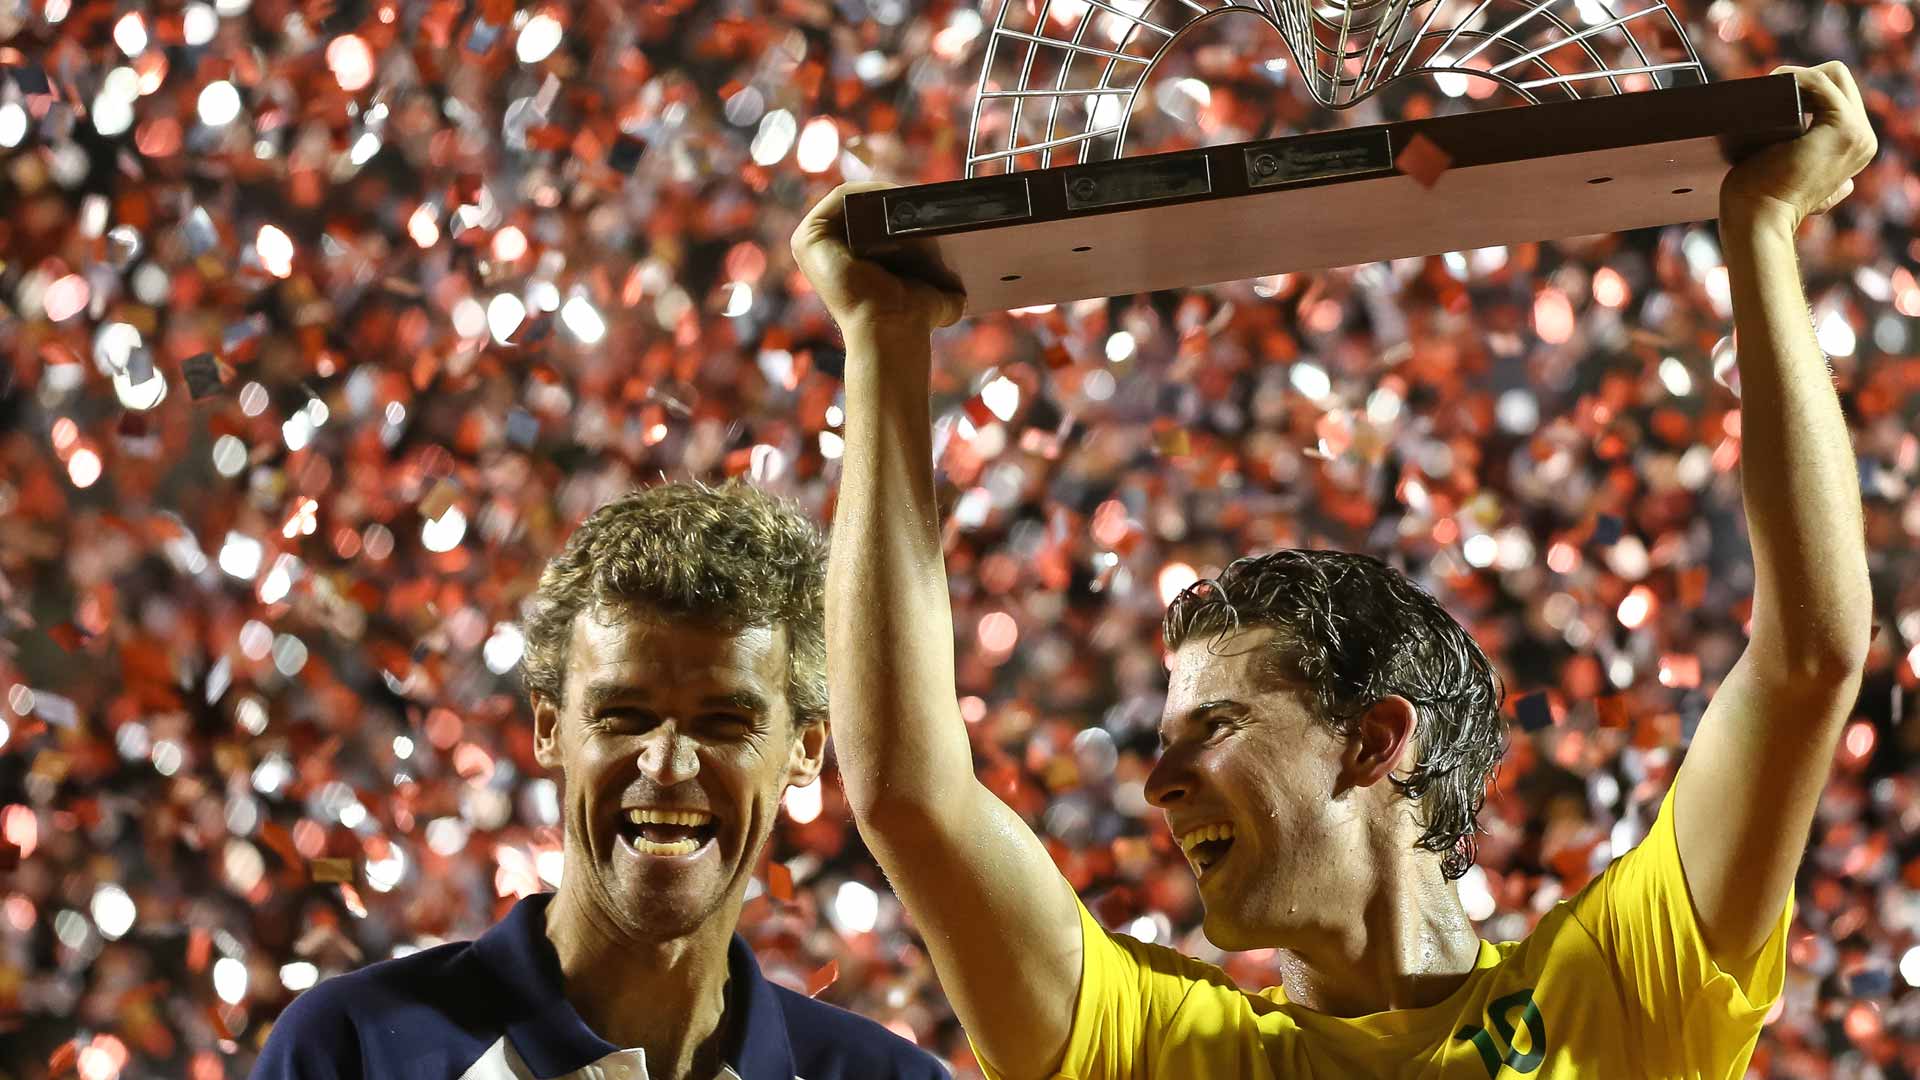 Former World No. 1 Gustavo Kuerten and Dominic Thiem share a laugh at the 2017 Rio Open trophy ceremony.